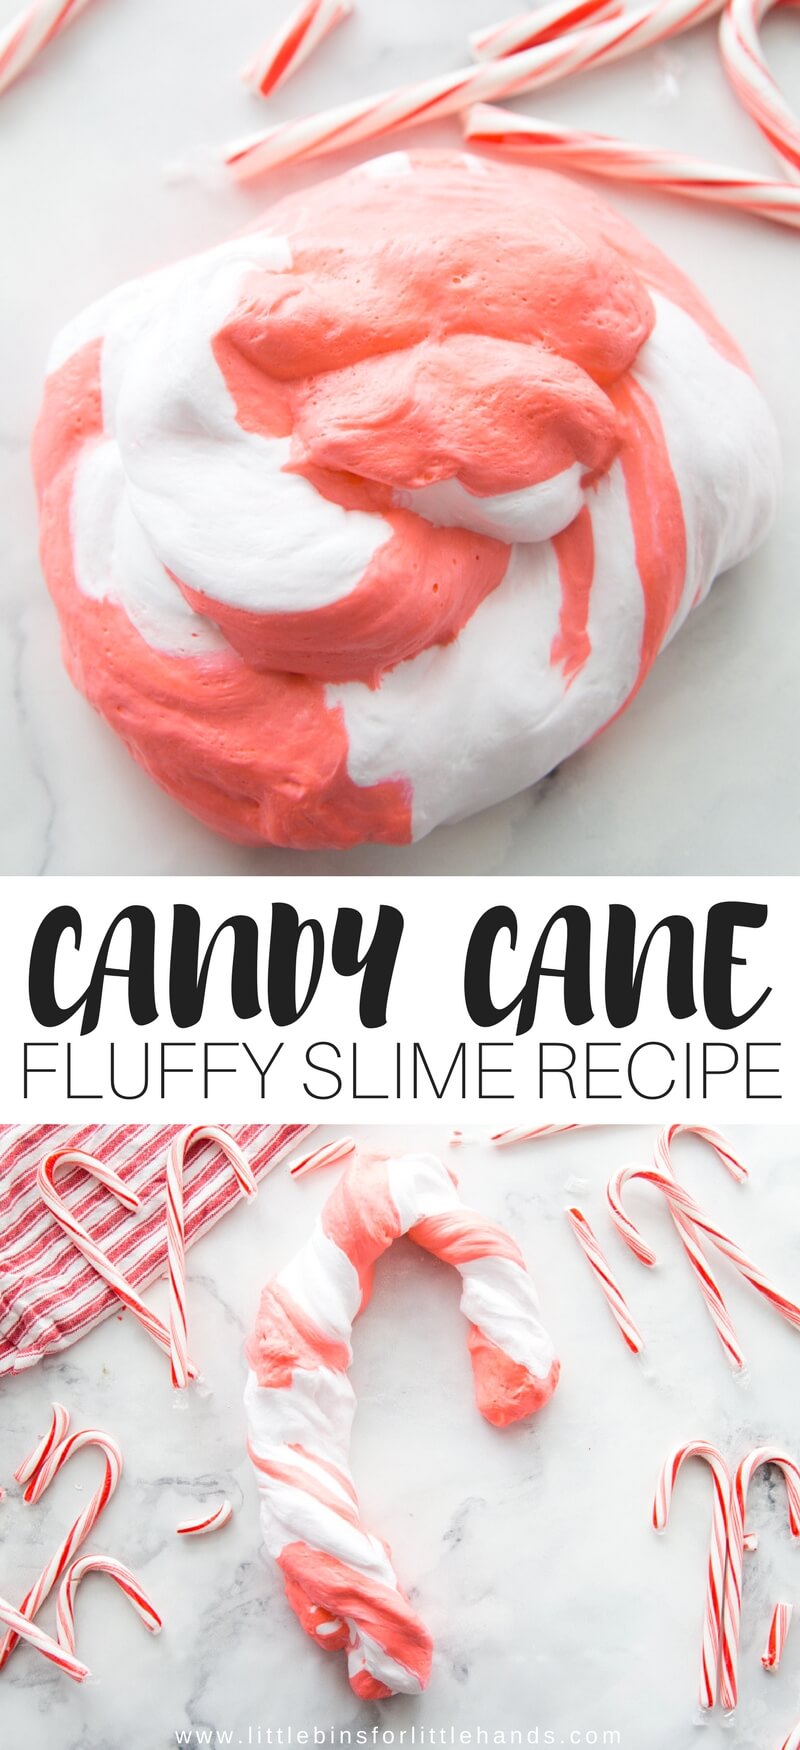 This science experiment for kids is the perfect holiday STEM activity! Combine the love of slime and candy canes for this fun science activity! #STEM #slime #science